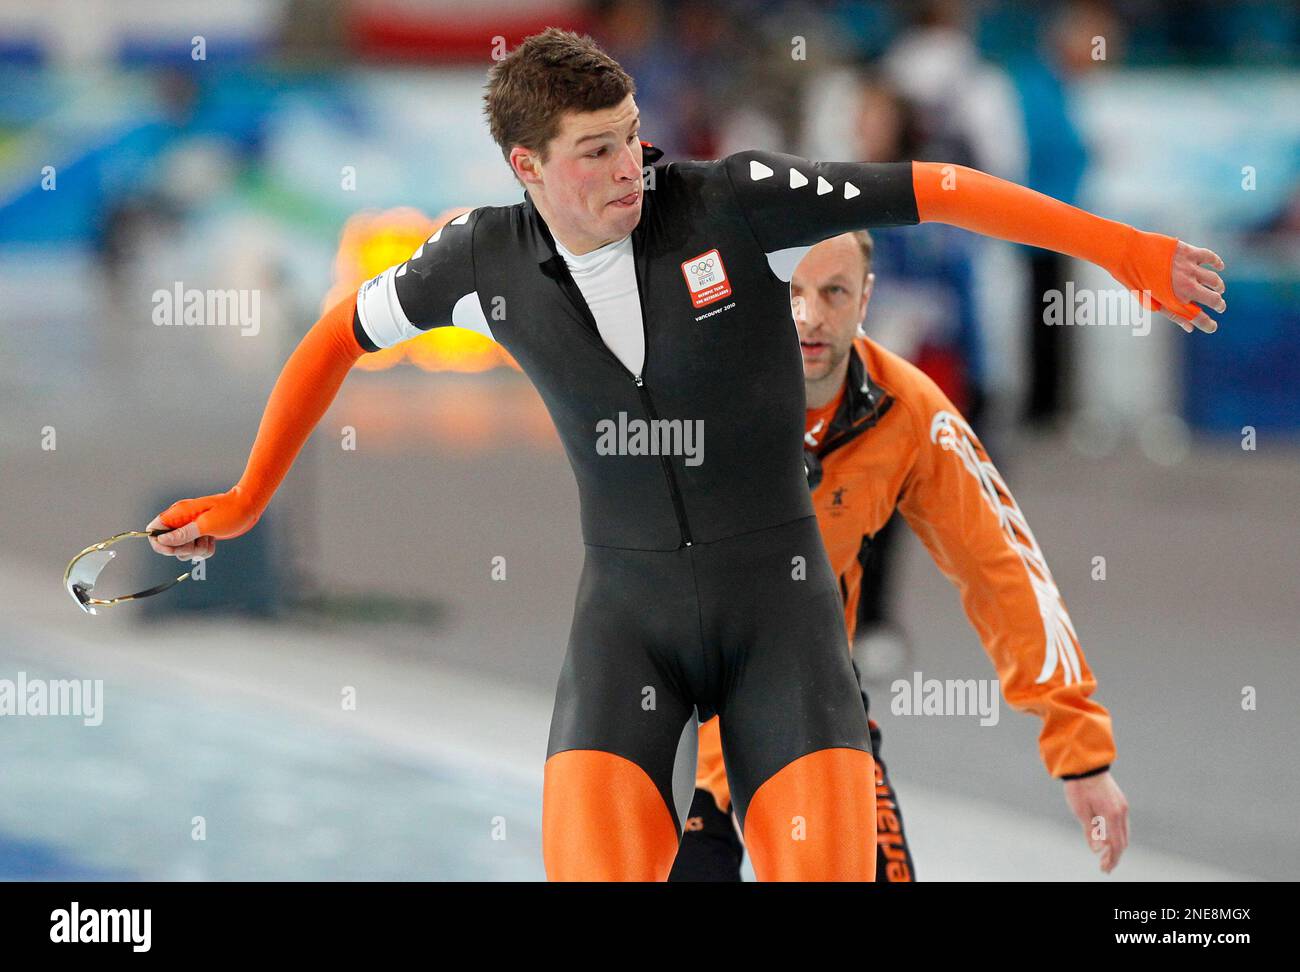 Netherlands's Sven Kramer throws his glasses away after being disqualified for he forgot to switch a lane during the men's 10,000 meter speed skating race at the Richmond Olympic Oval at the Vancouver 2010 Olympics in Vancouver, British Columbia, Tuesday, Feb. 23, 2010. At right is his coach Gerard Kemkers. (AP Photo/Chris Carlson) Stock Photo